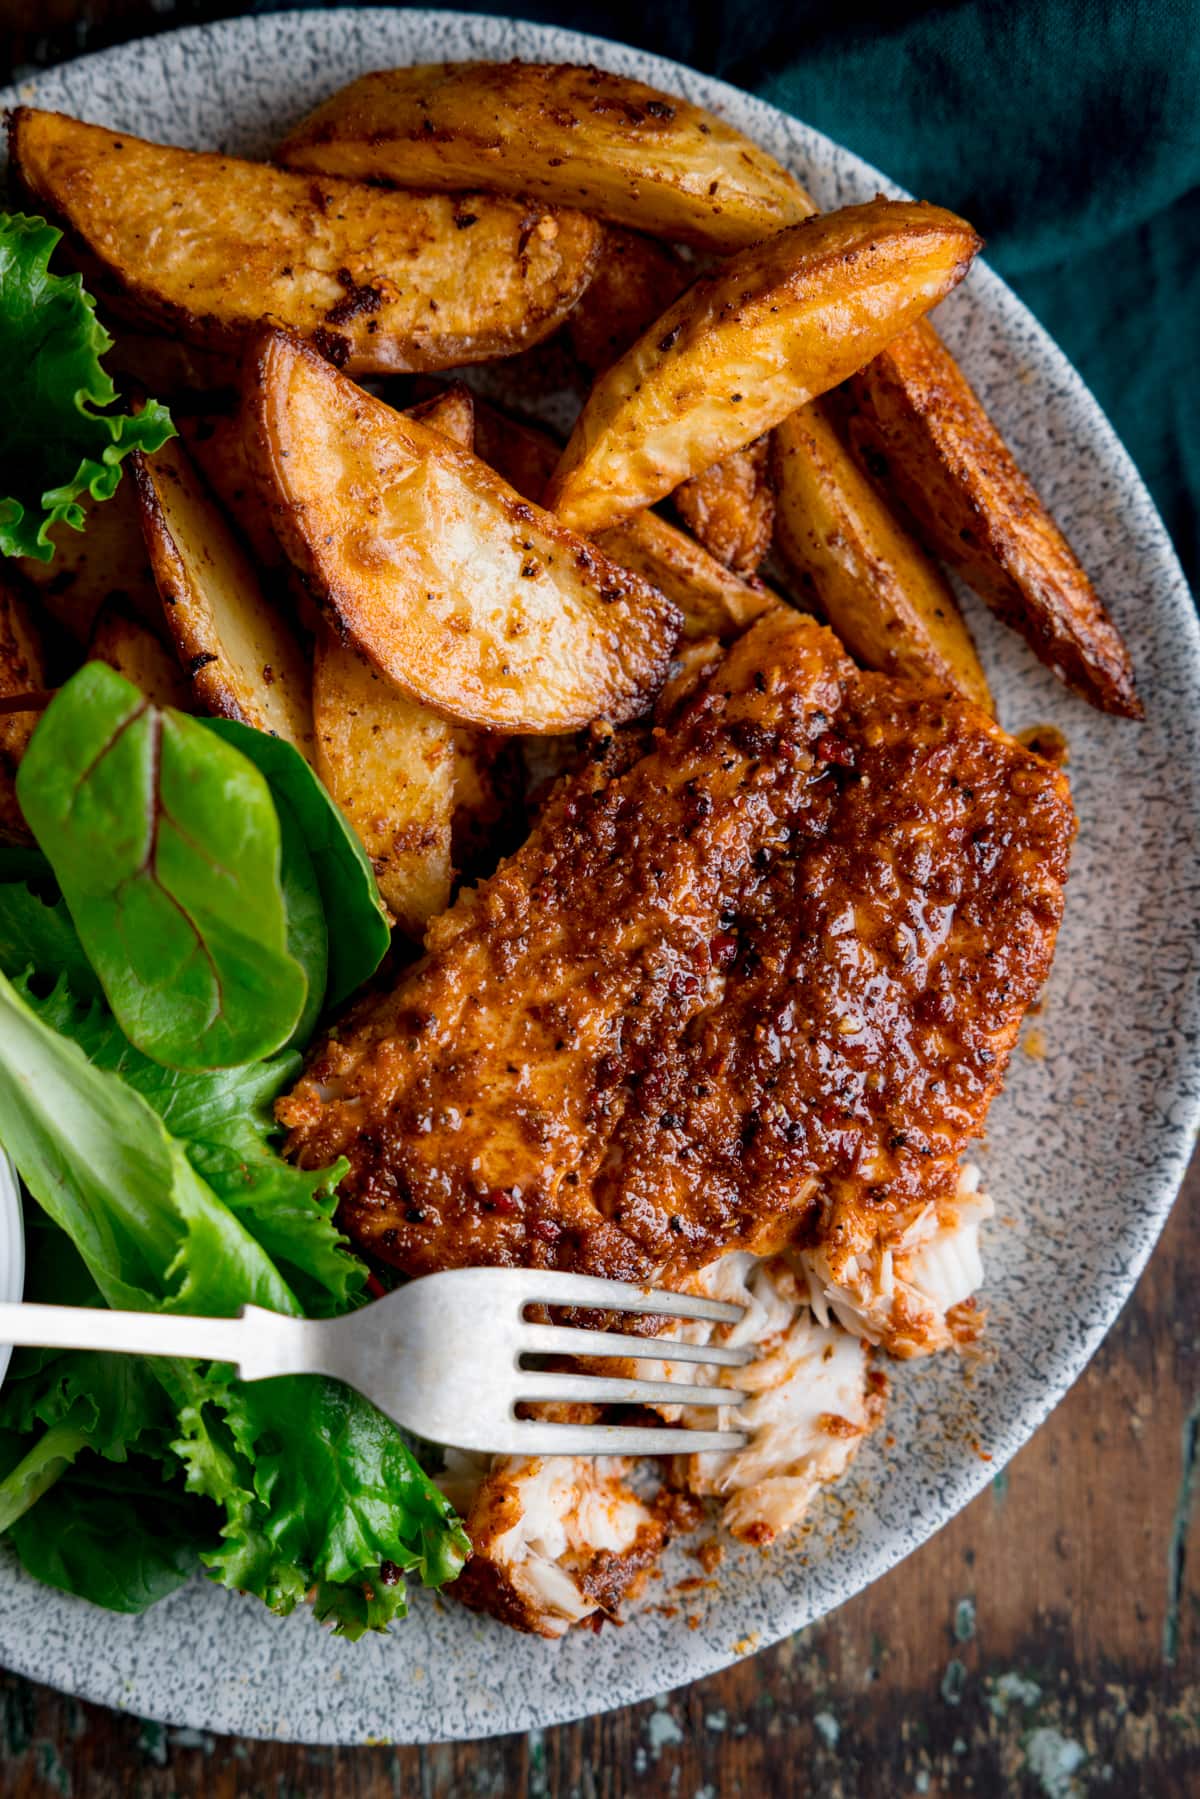 An overhead image of cajun cod, smoky potato wedges and some green salad leaves placed on a grey plate. The cod is slightly flaked with the tip of a silver fork resting on it. This is on a brown background.